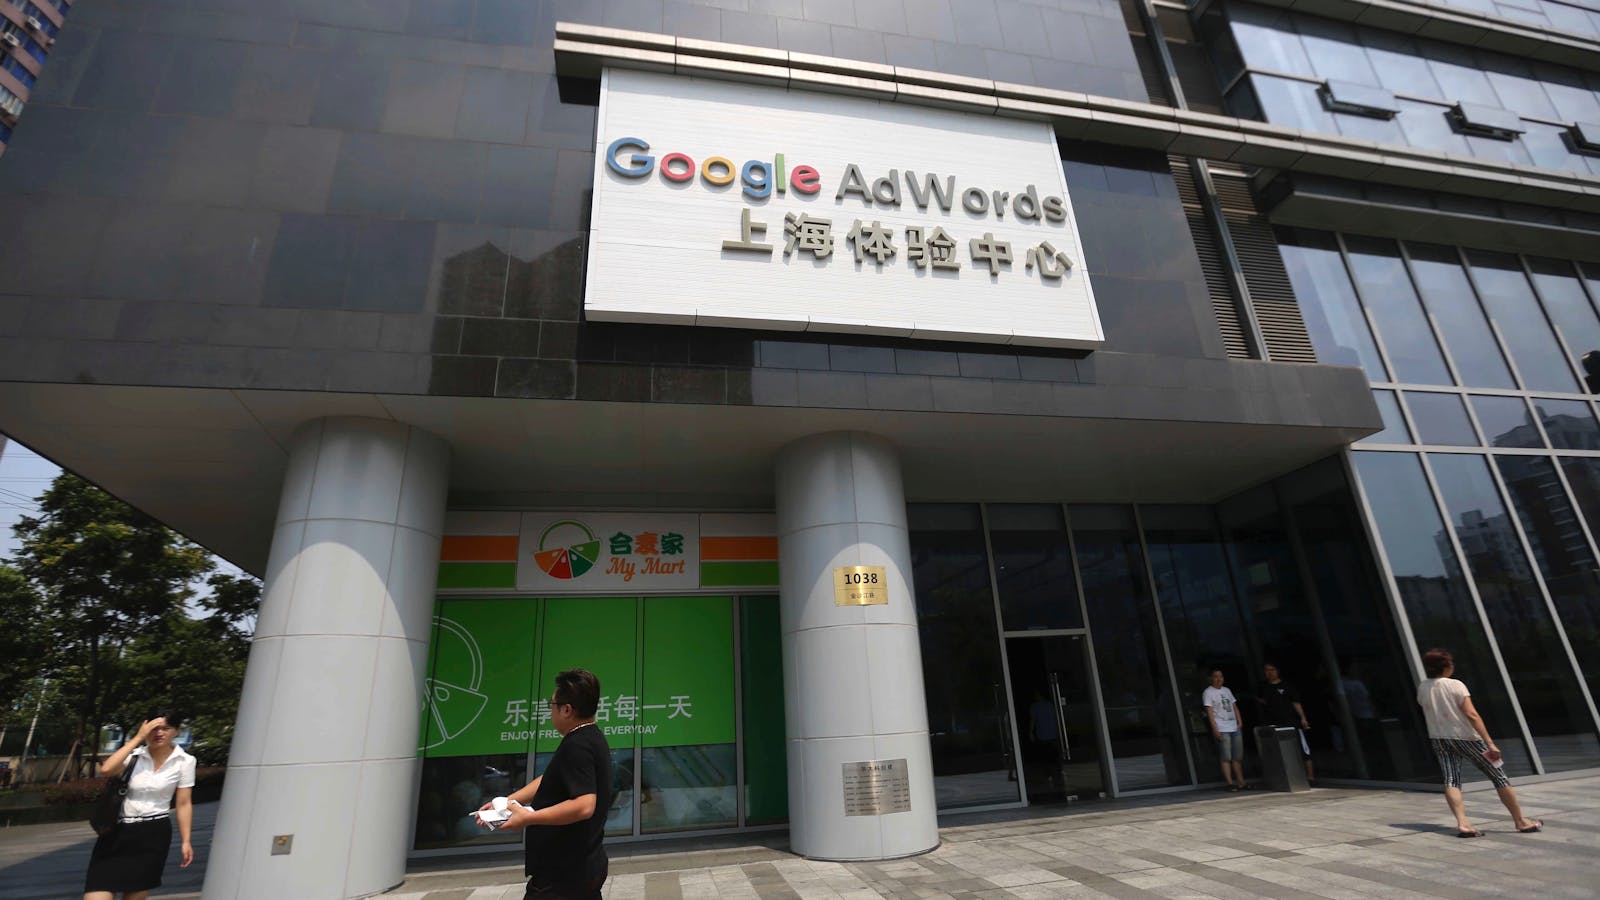 A Google Export Experience Center, known until recently as a Google AdWords Experience Center, in Shanghai in 2016. Photo by AP